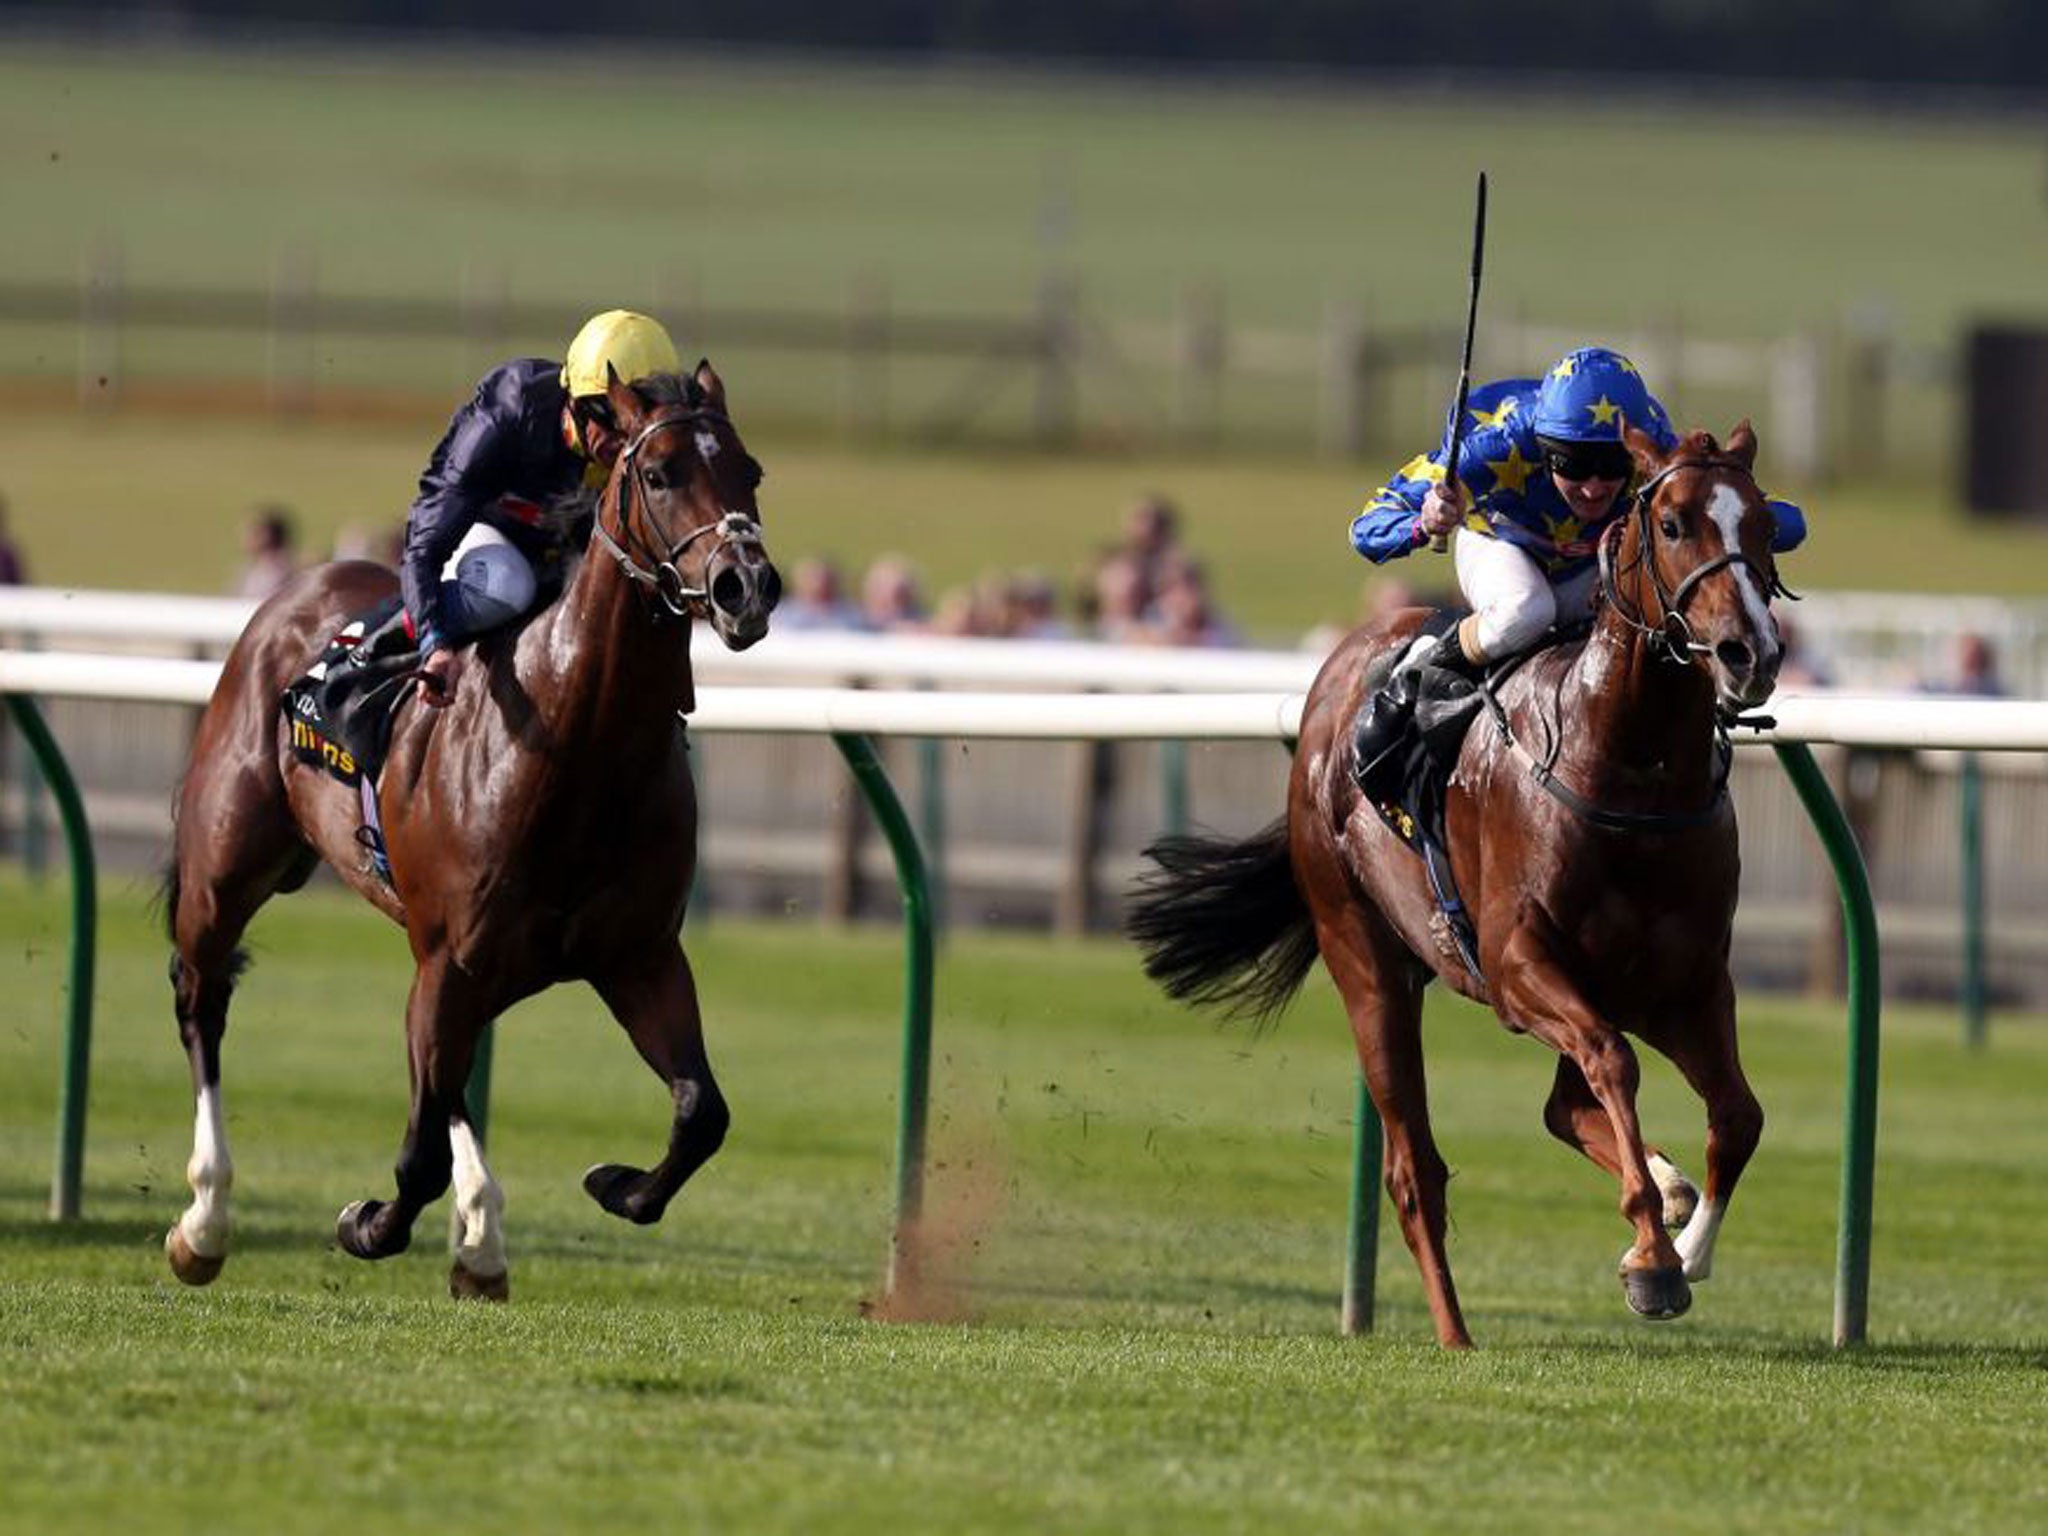 Liam Keniry rides Miracle of Medinah to victory in the Somerville Tattersall Stakes at Newmarket yesterday